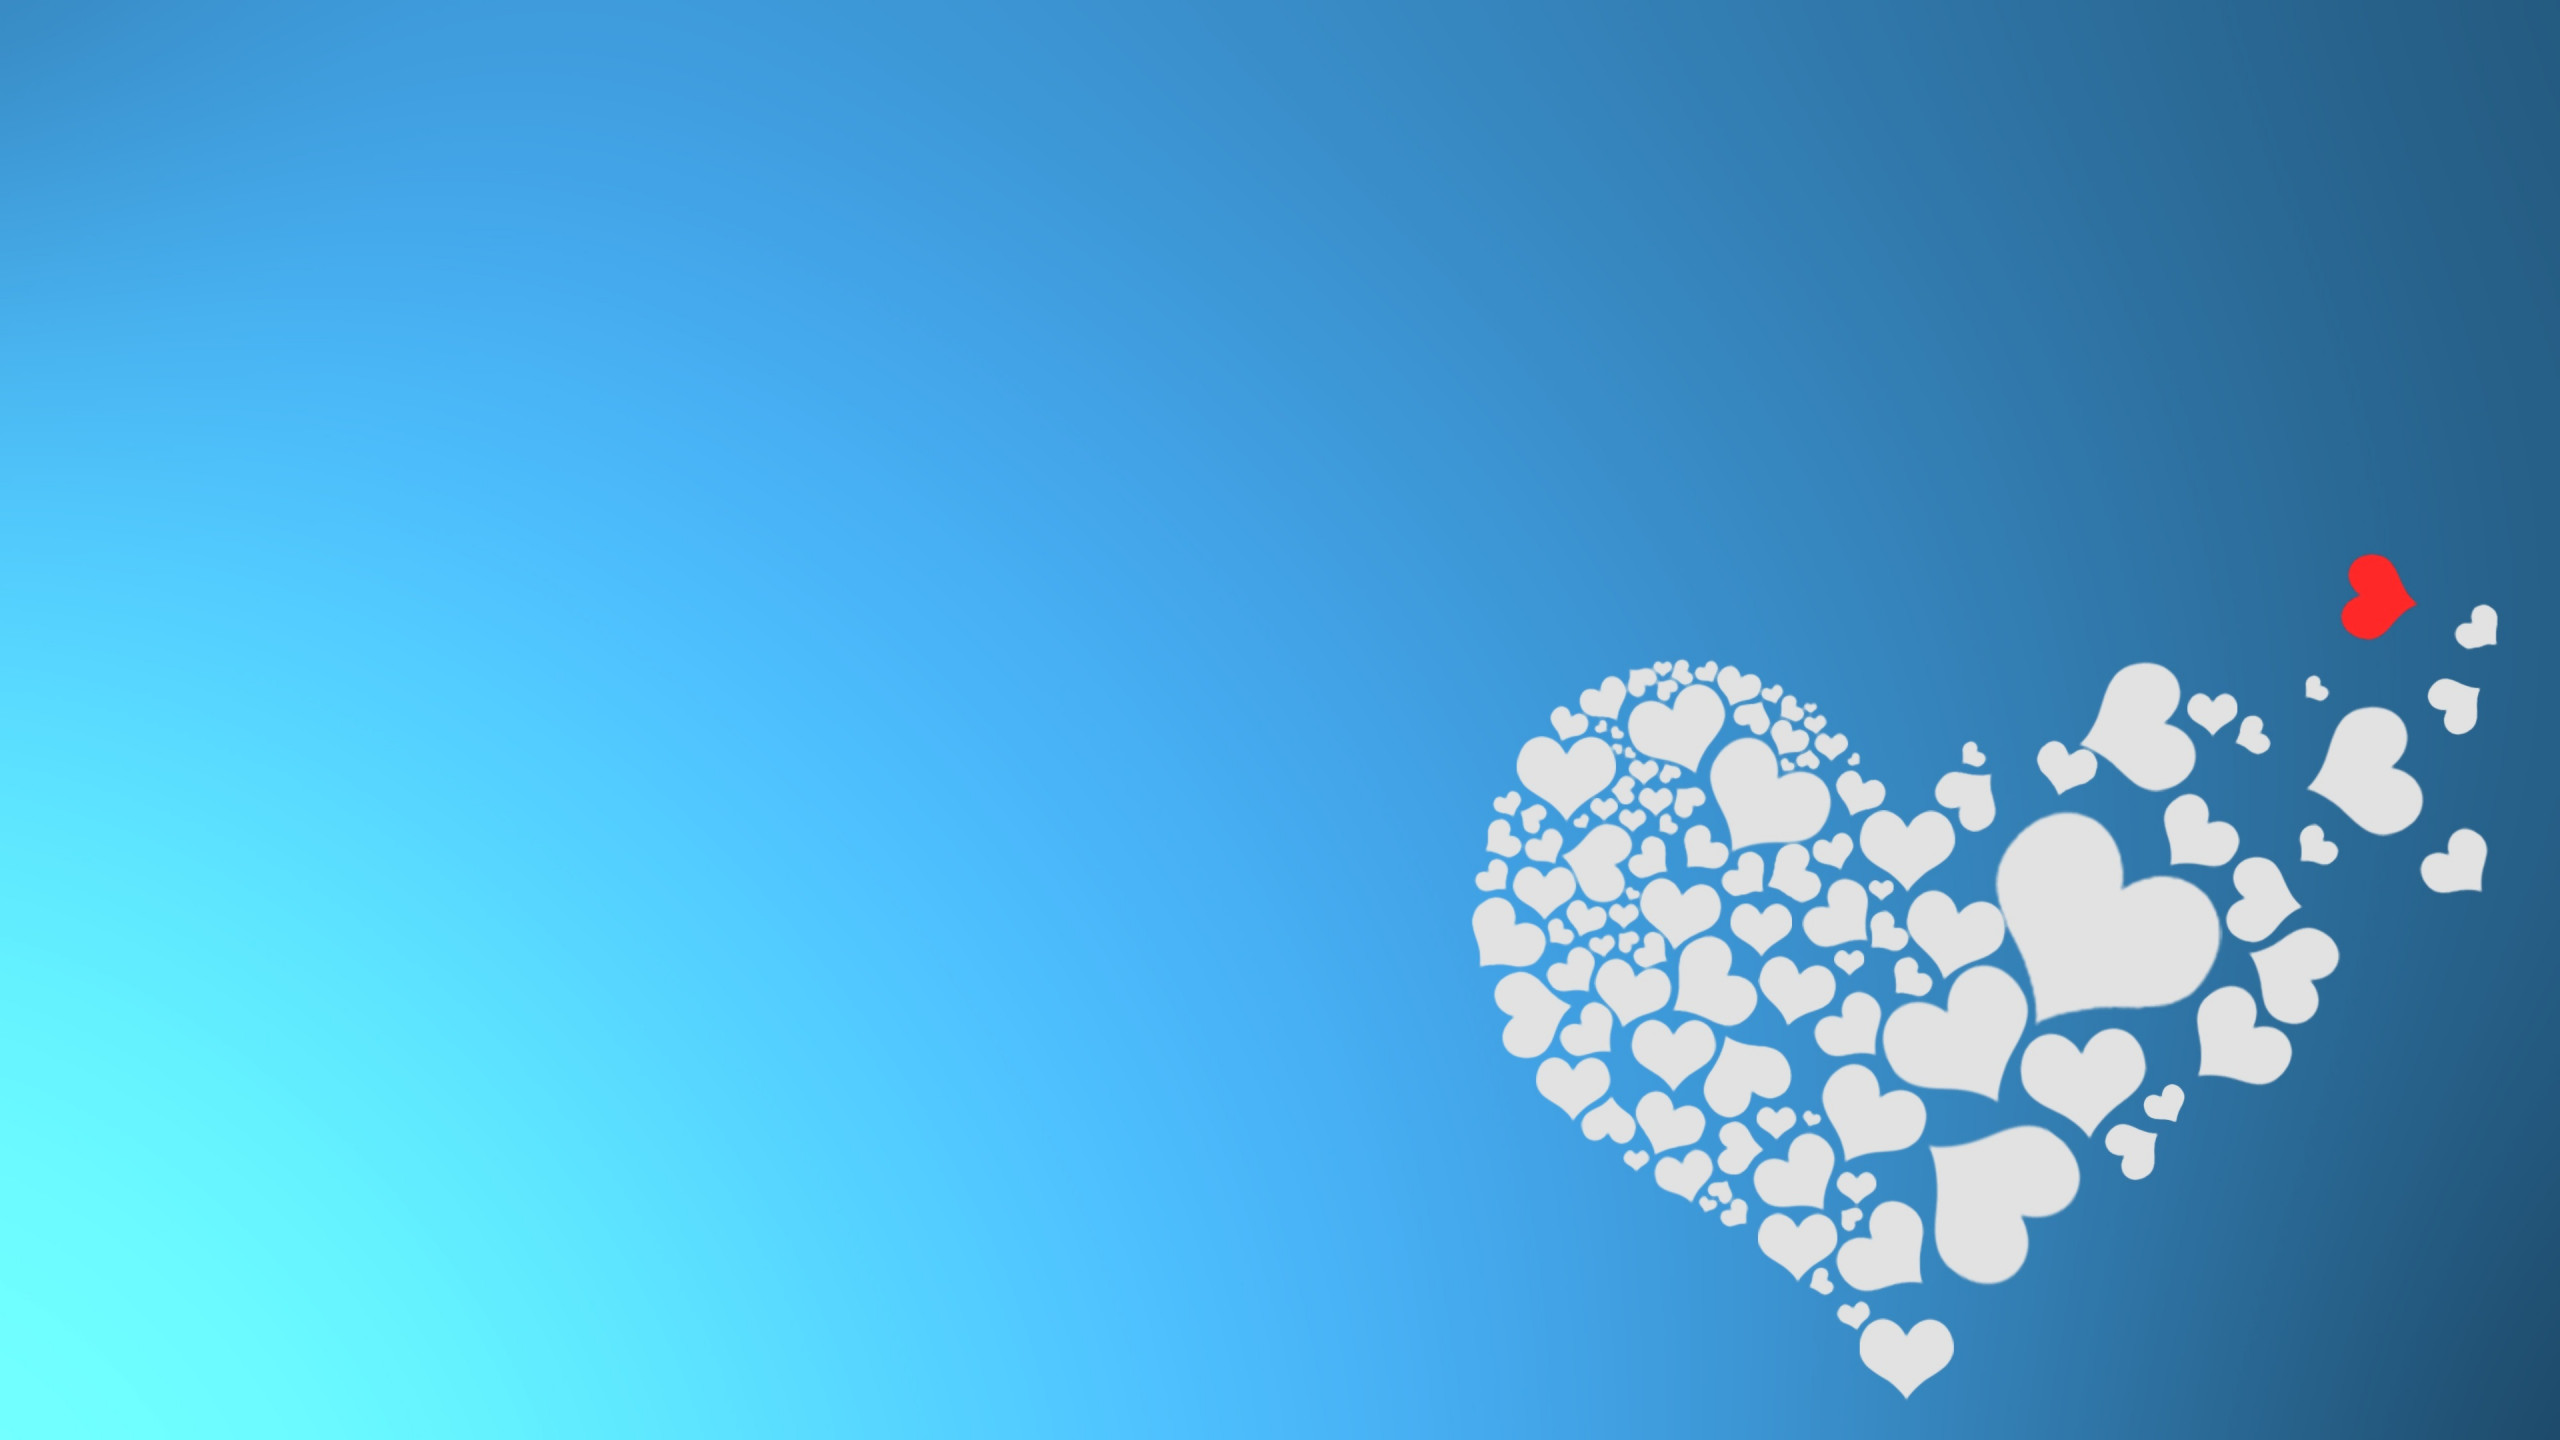 The hearts of love wallpaper 2560x1440